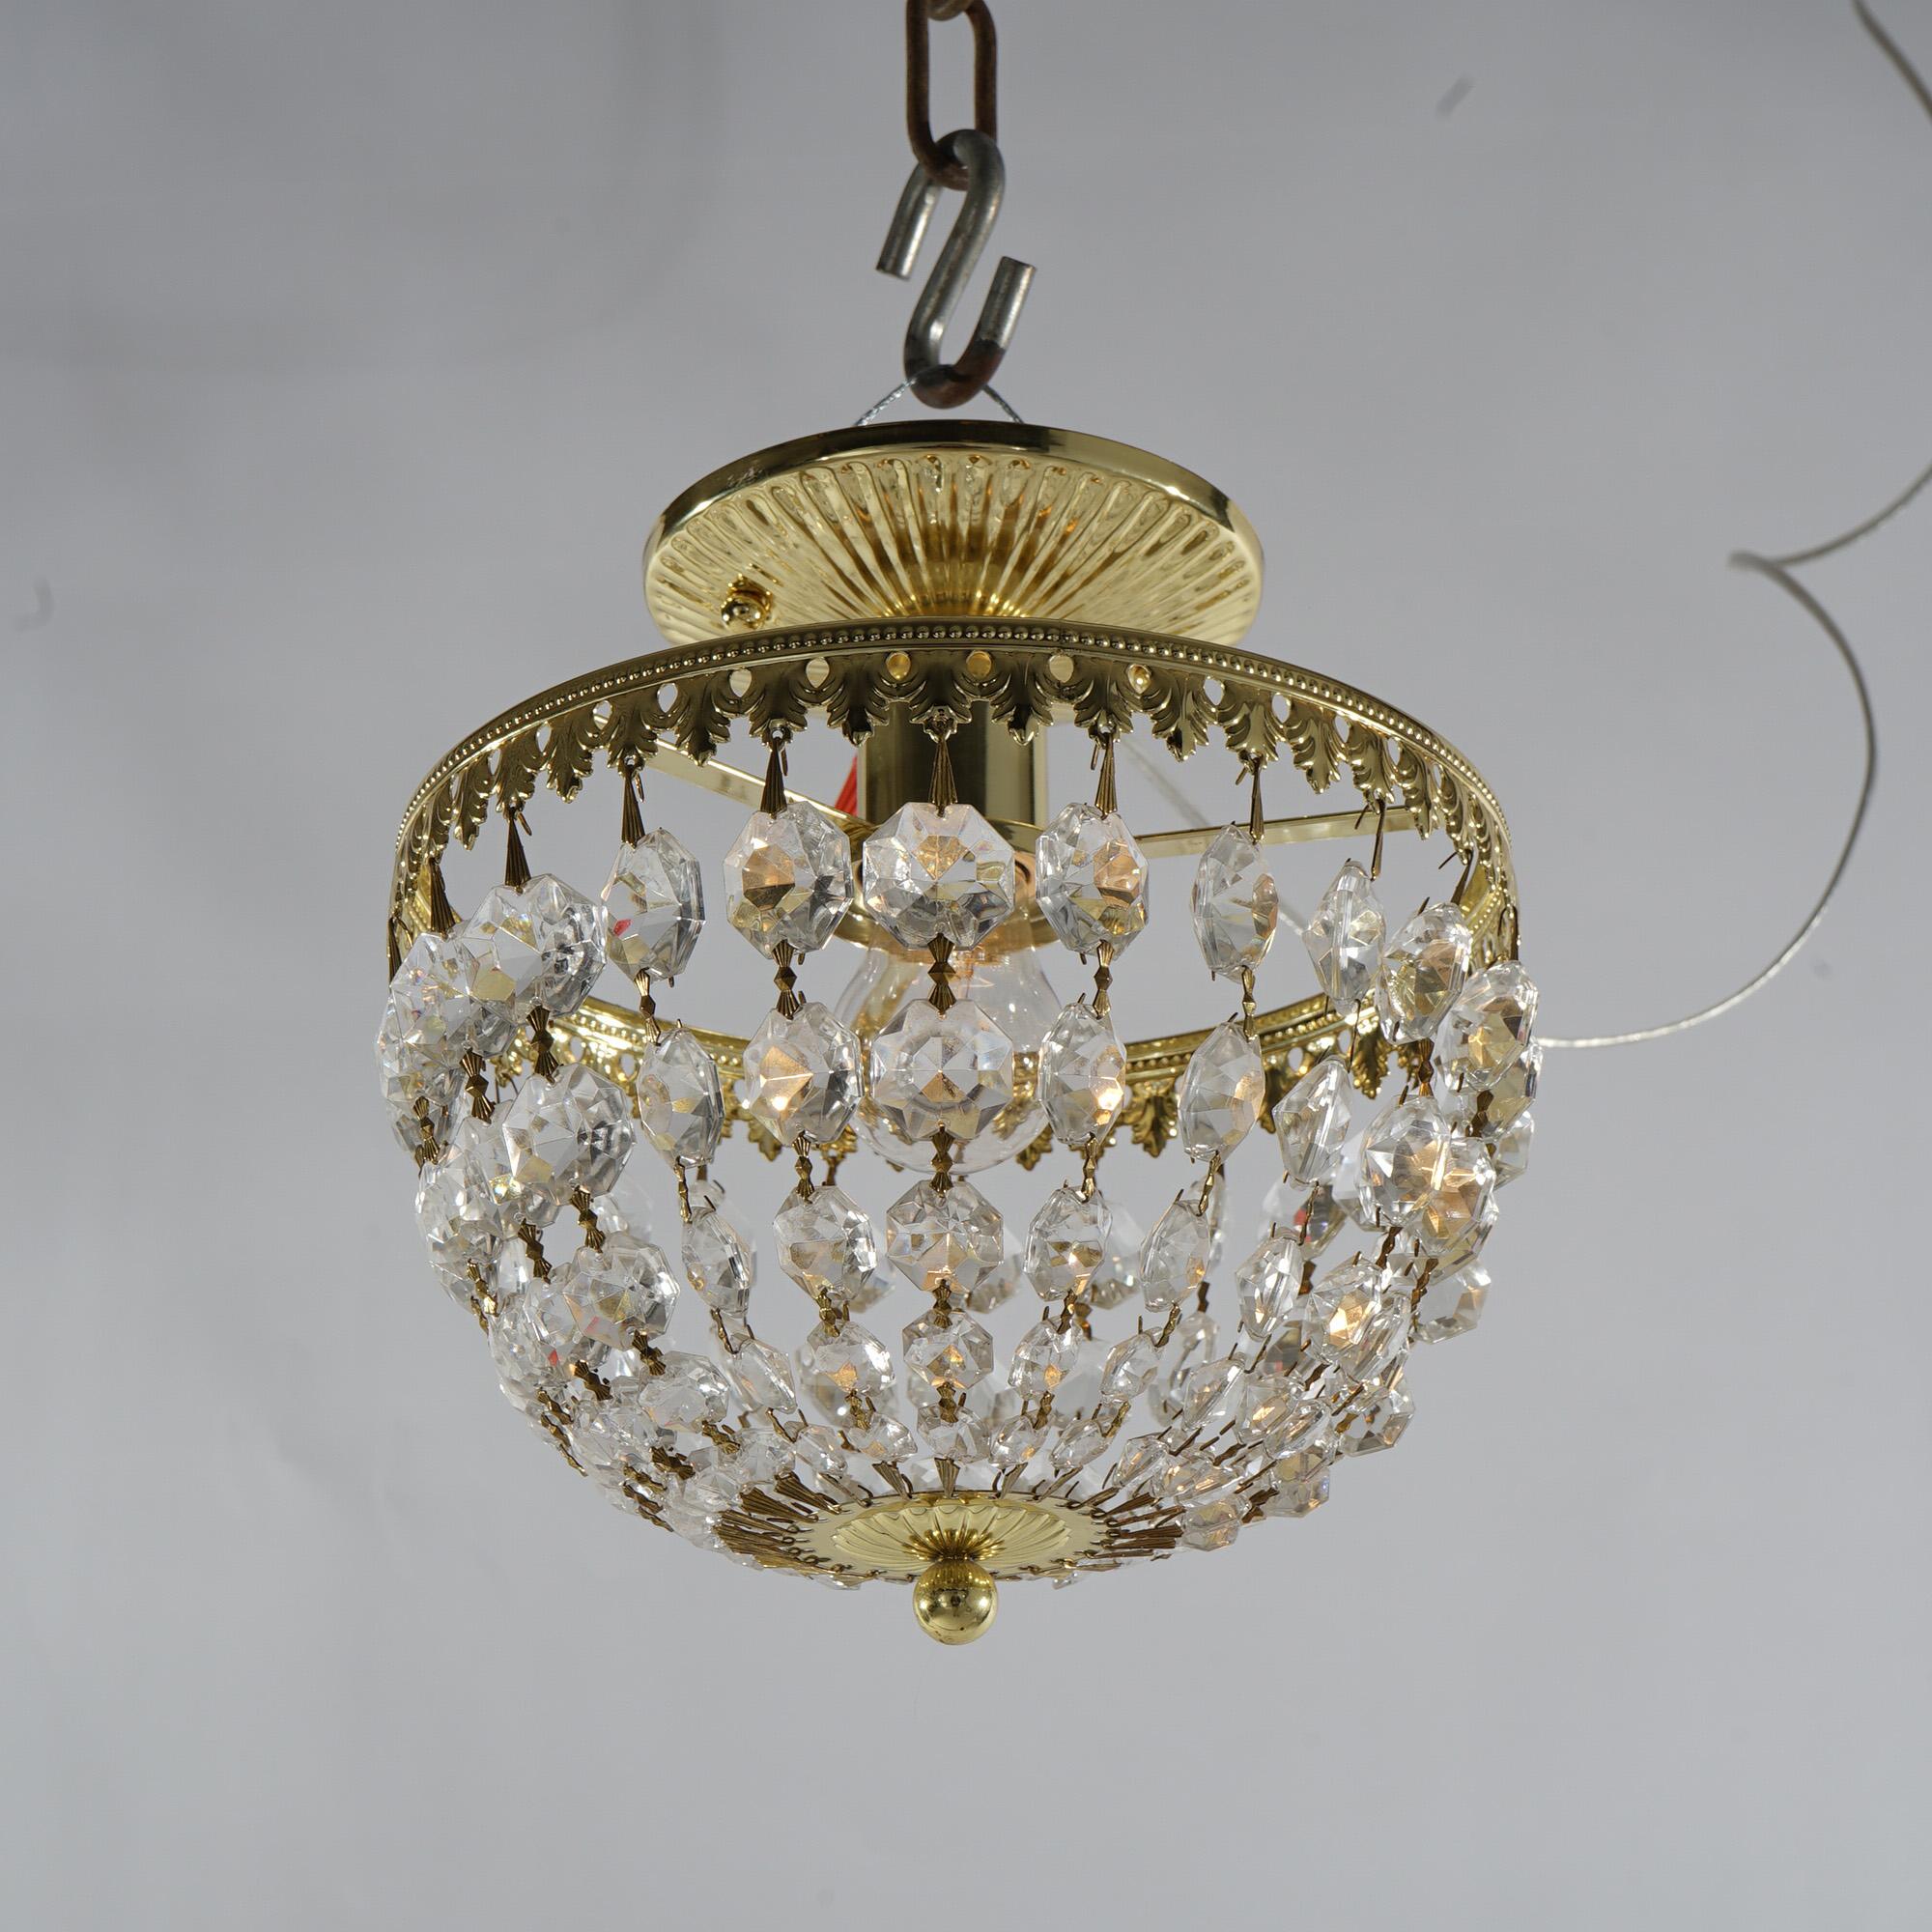 American Petite Gilt Metal & Crystal Ceiling Light Fixture 20th C For Sale